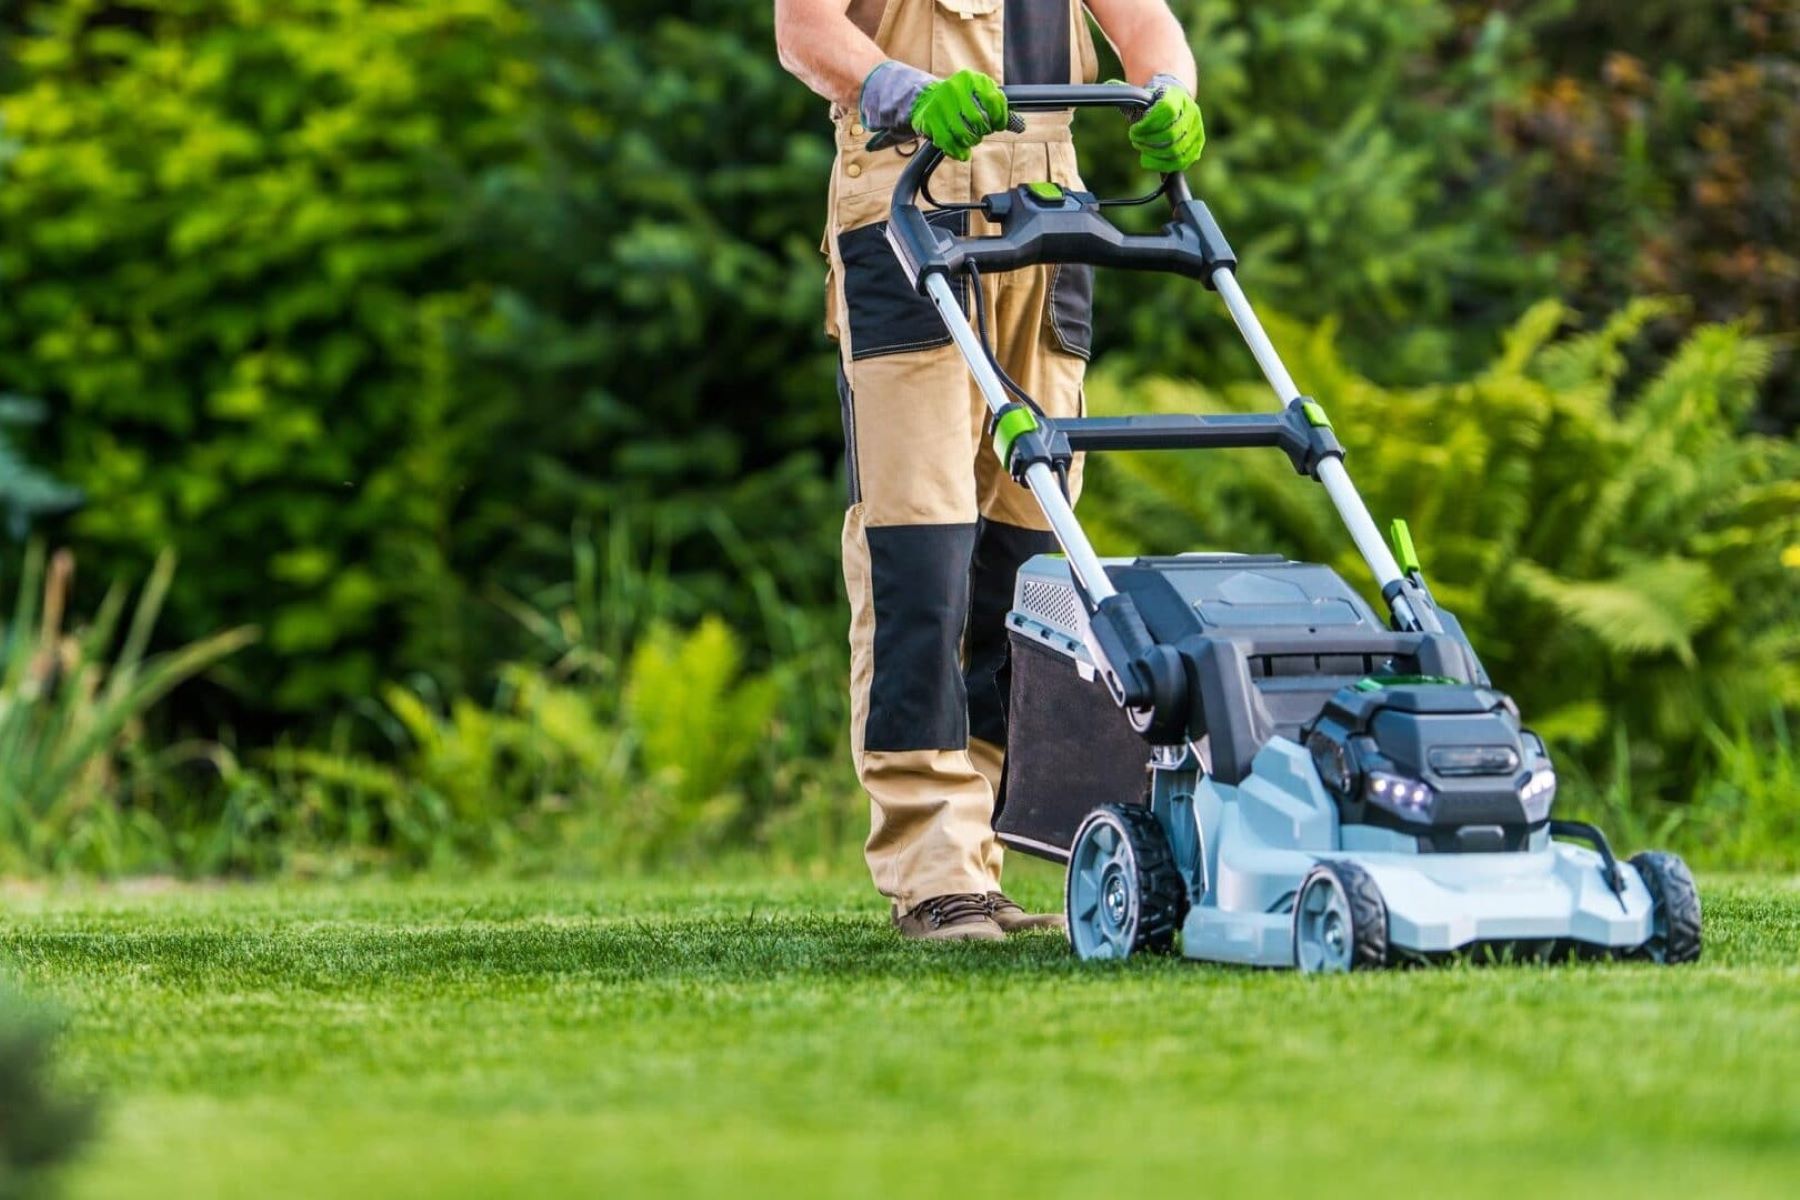 Lawn Mower Power: Finding The Best Battery-Powered Option